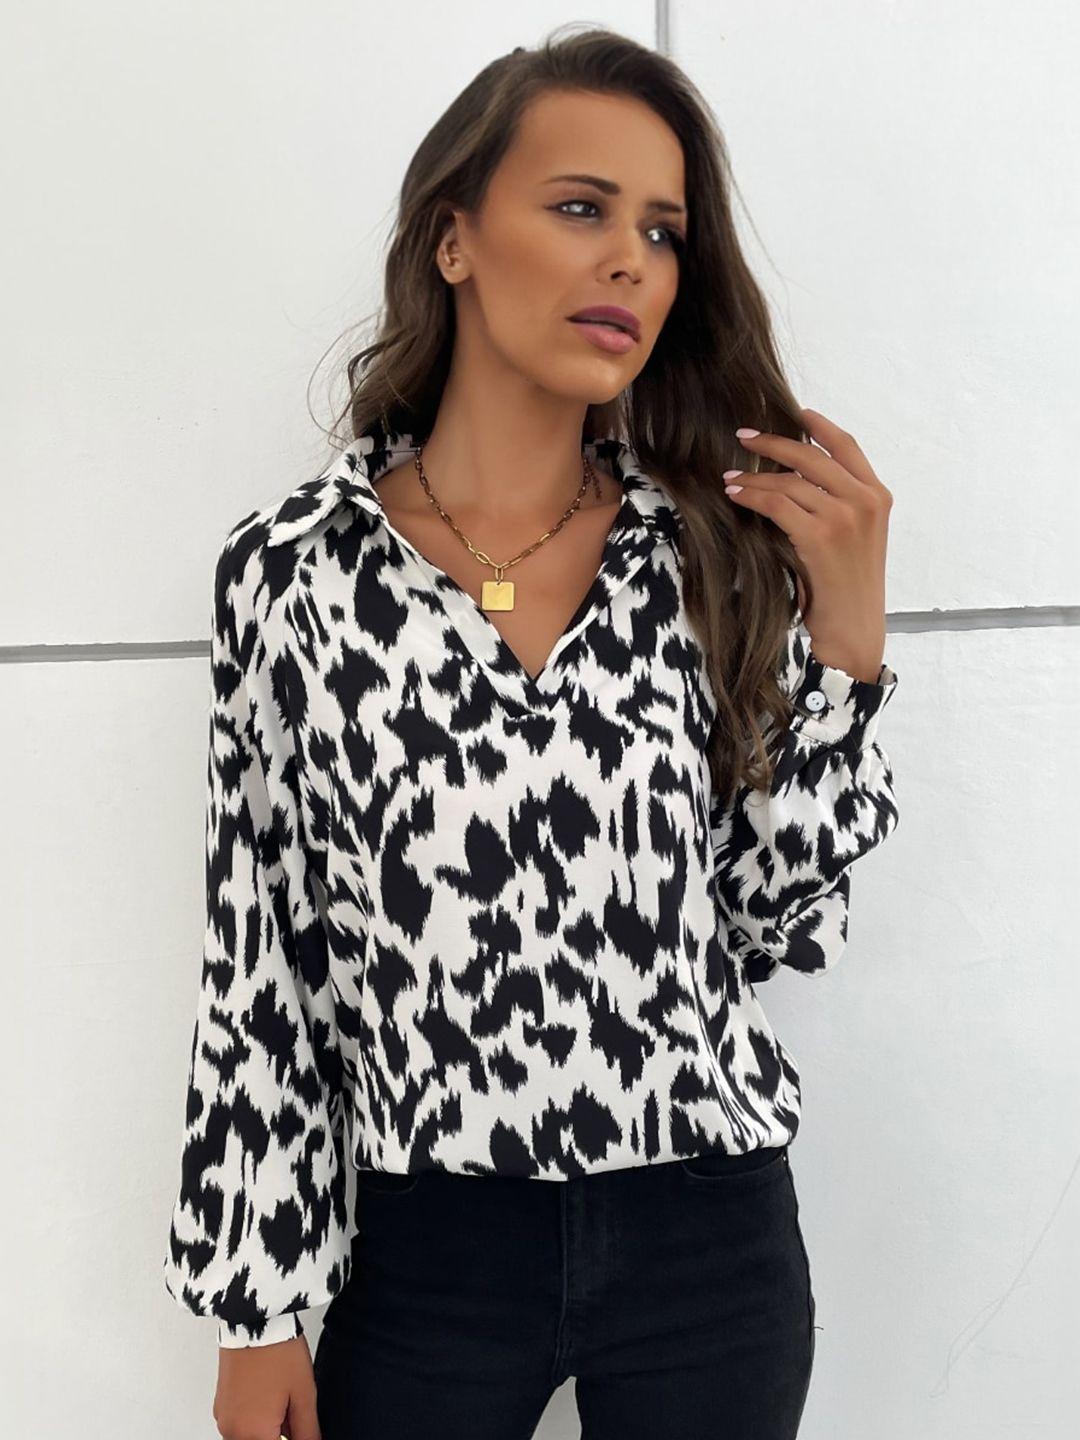 stylecast black abstract printed shirt collar cuffed sleeves shirt style top